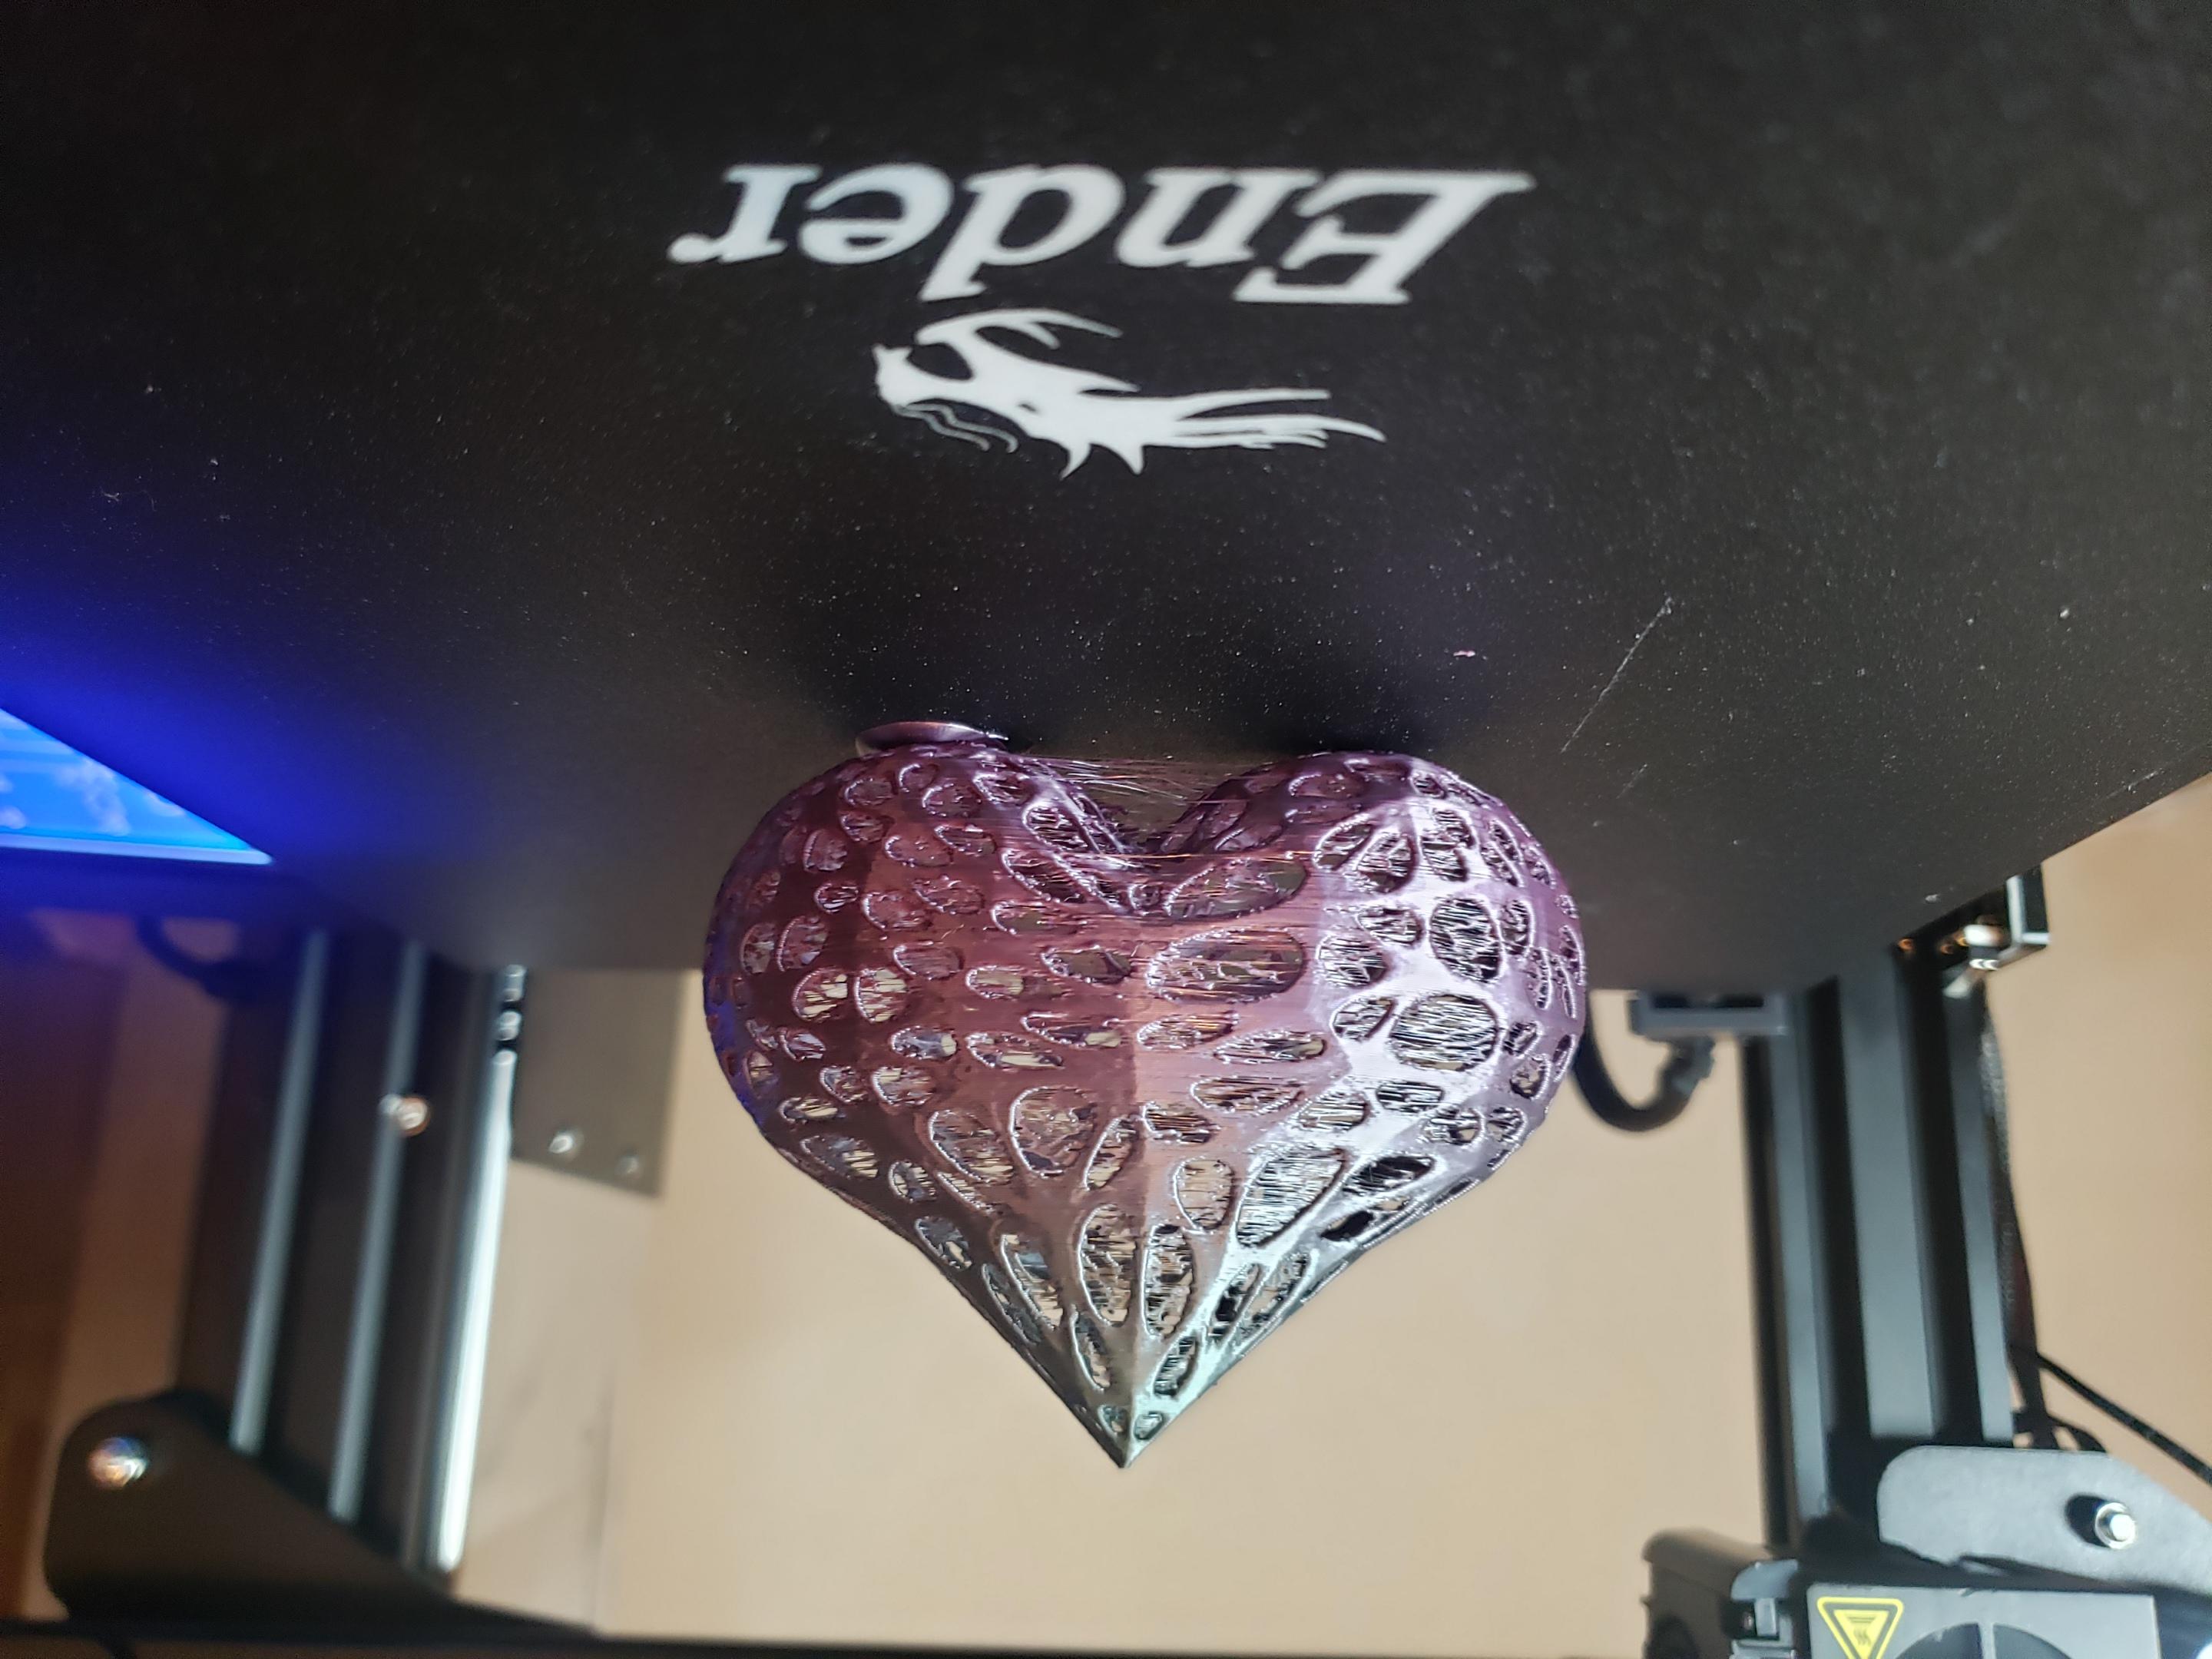 Another Stupid Heart - Ender 3 Pro- Scaled to 300%, No Supports, Retraction disabled, ttyt Shiney Rainbow 1.75mm pla filament - 3d model